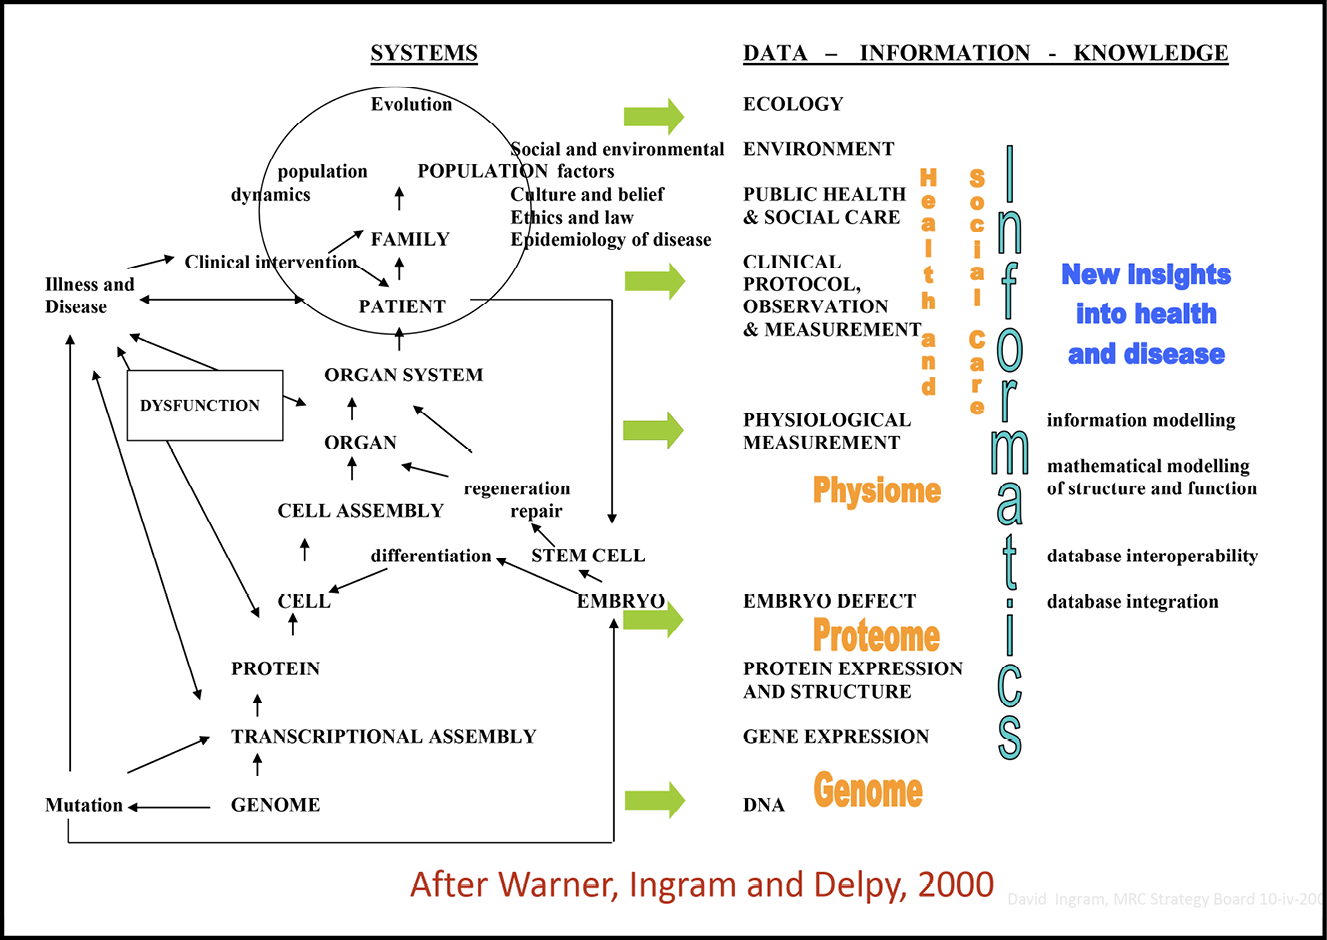 A presentation slide featuring a diagram that demonstrates the connected information landscape of human biology and medicine (After Warner, Ingram and Delpy, 2000).